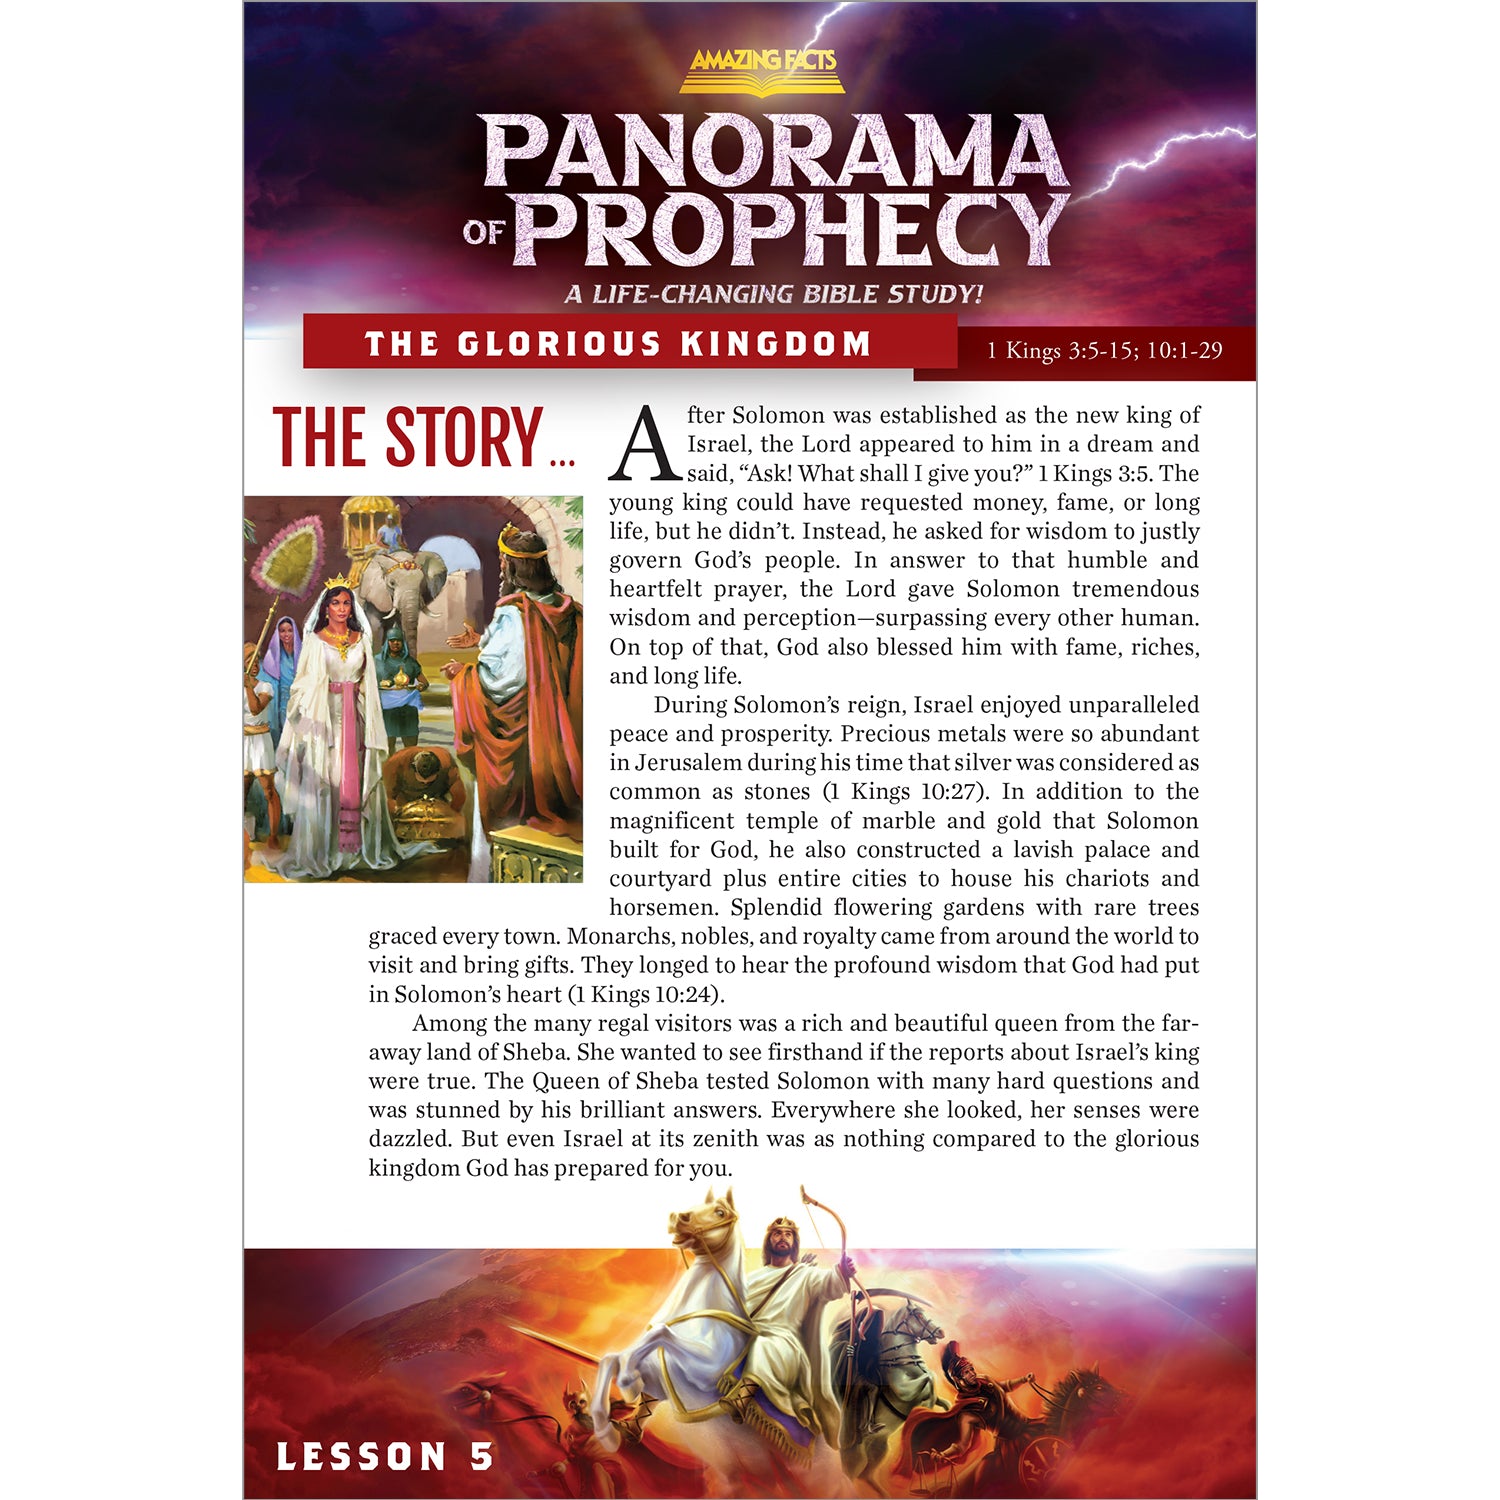 Panorama of Prophecy: The Glorious Kingdom Study Guide 05 by Doug Batchelor